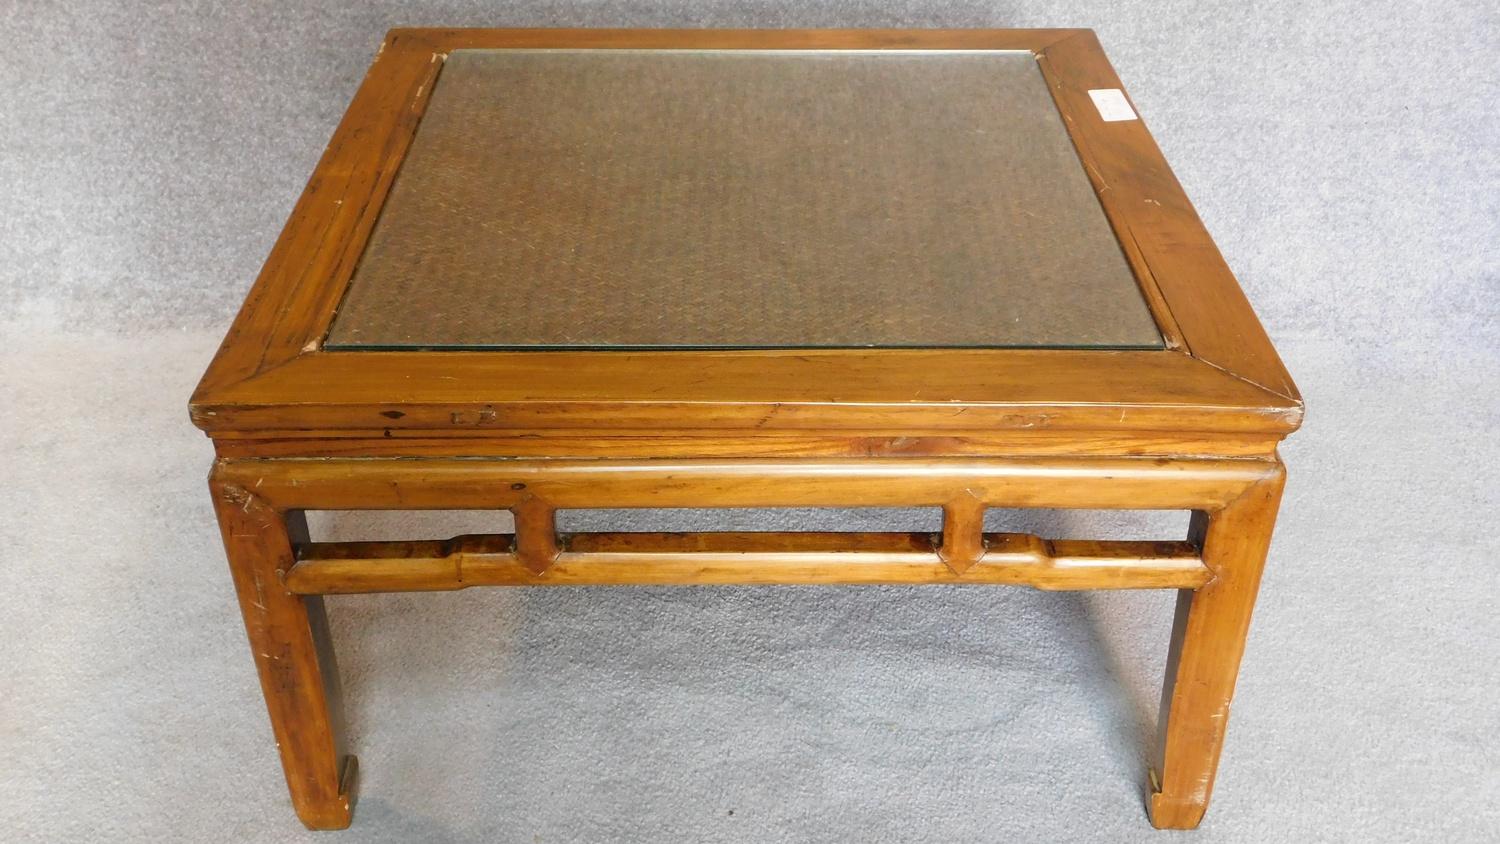 A Chinese style teak low table with inset rattan top. 50x88x88cm